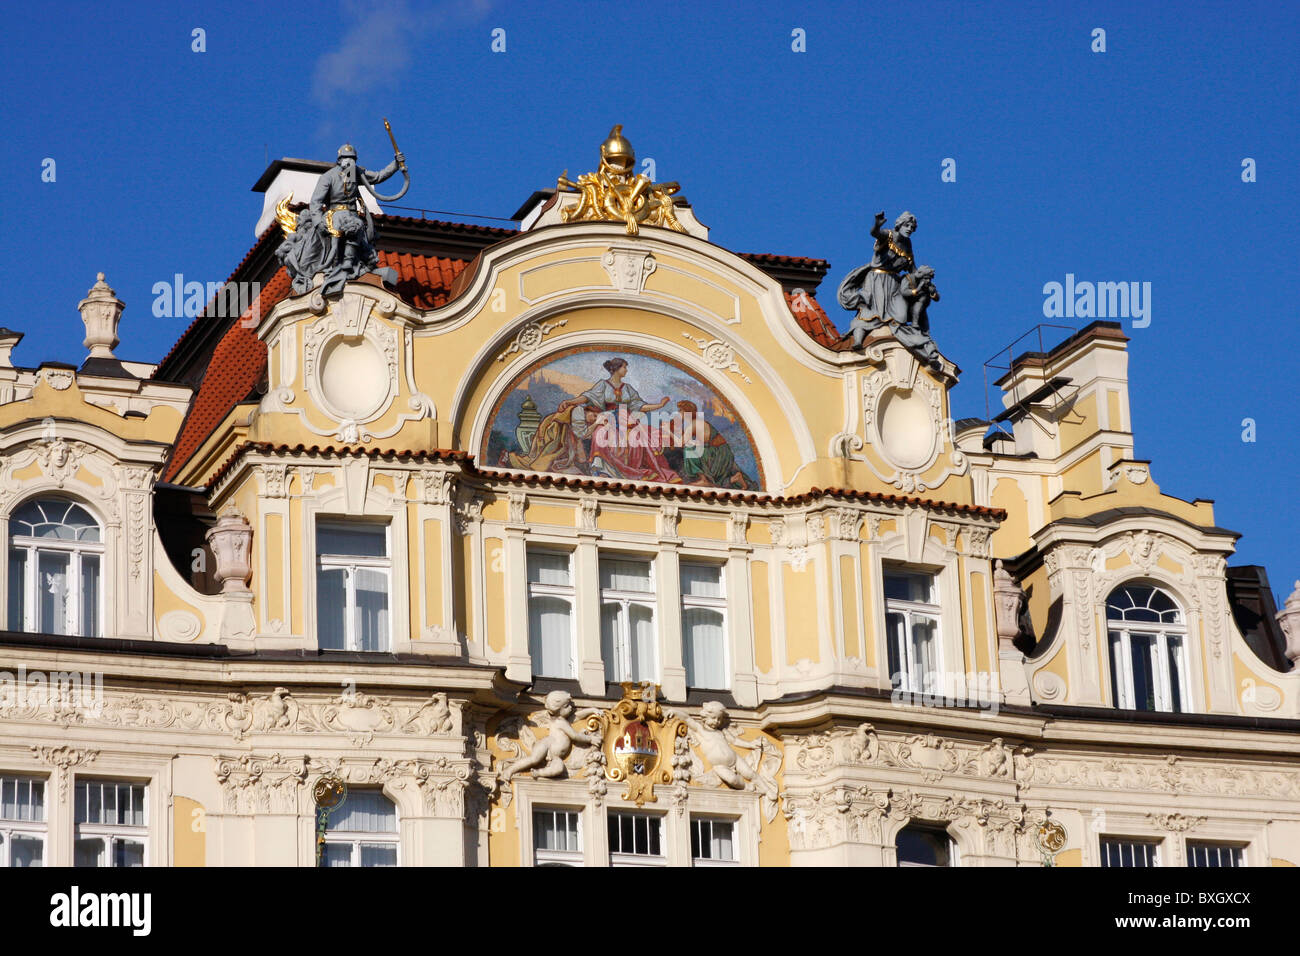 Beautifully painted and decorated facade of one of the outstanding buildings in the OLD TOWN SQUARE,Prague,Czech Republic Stock Photo